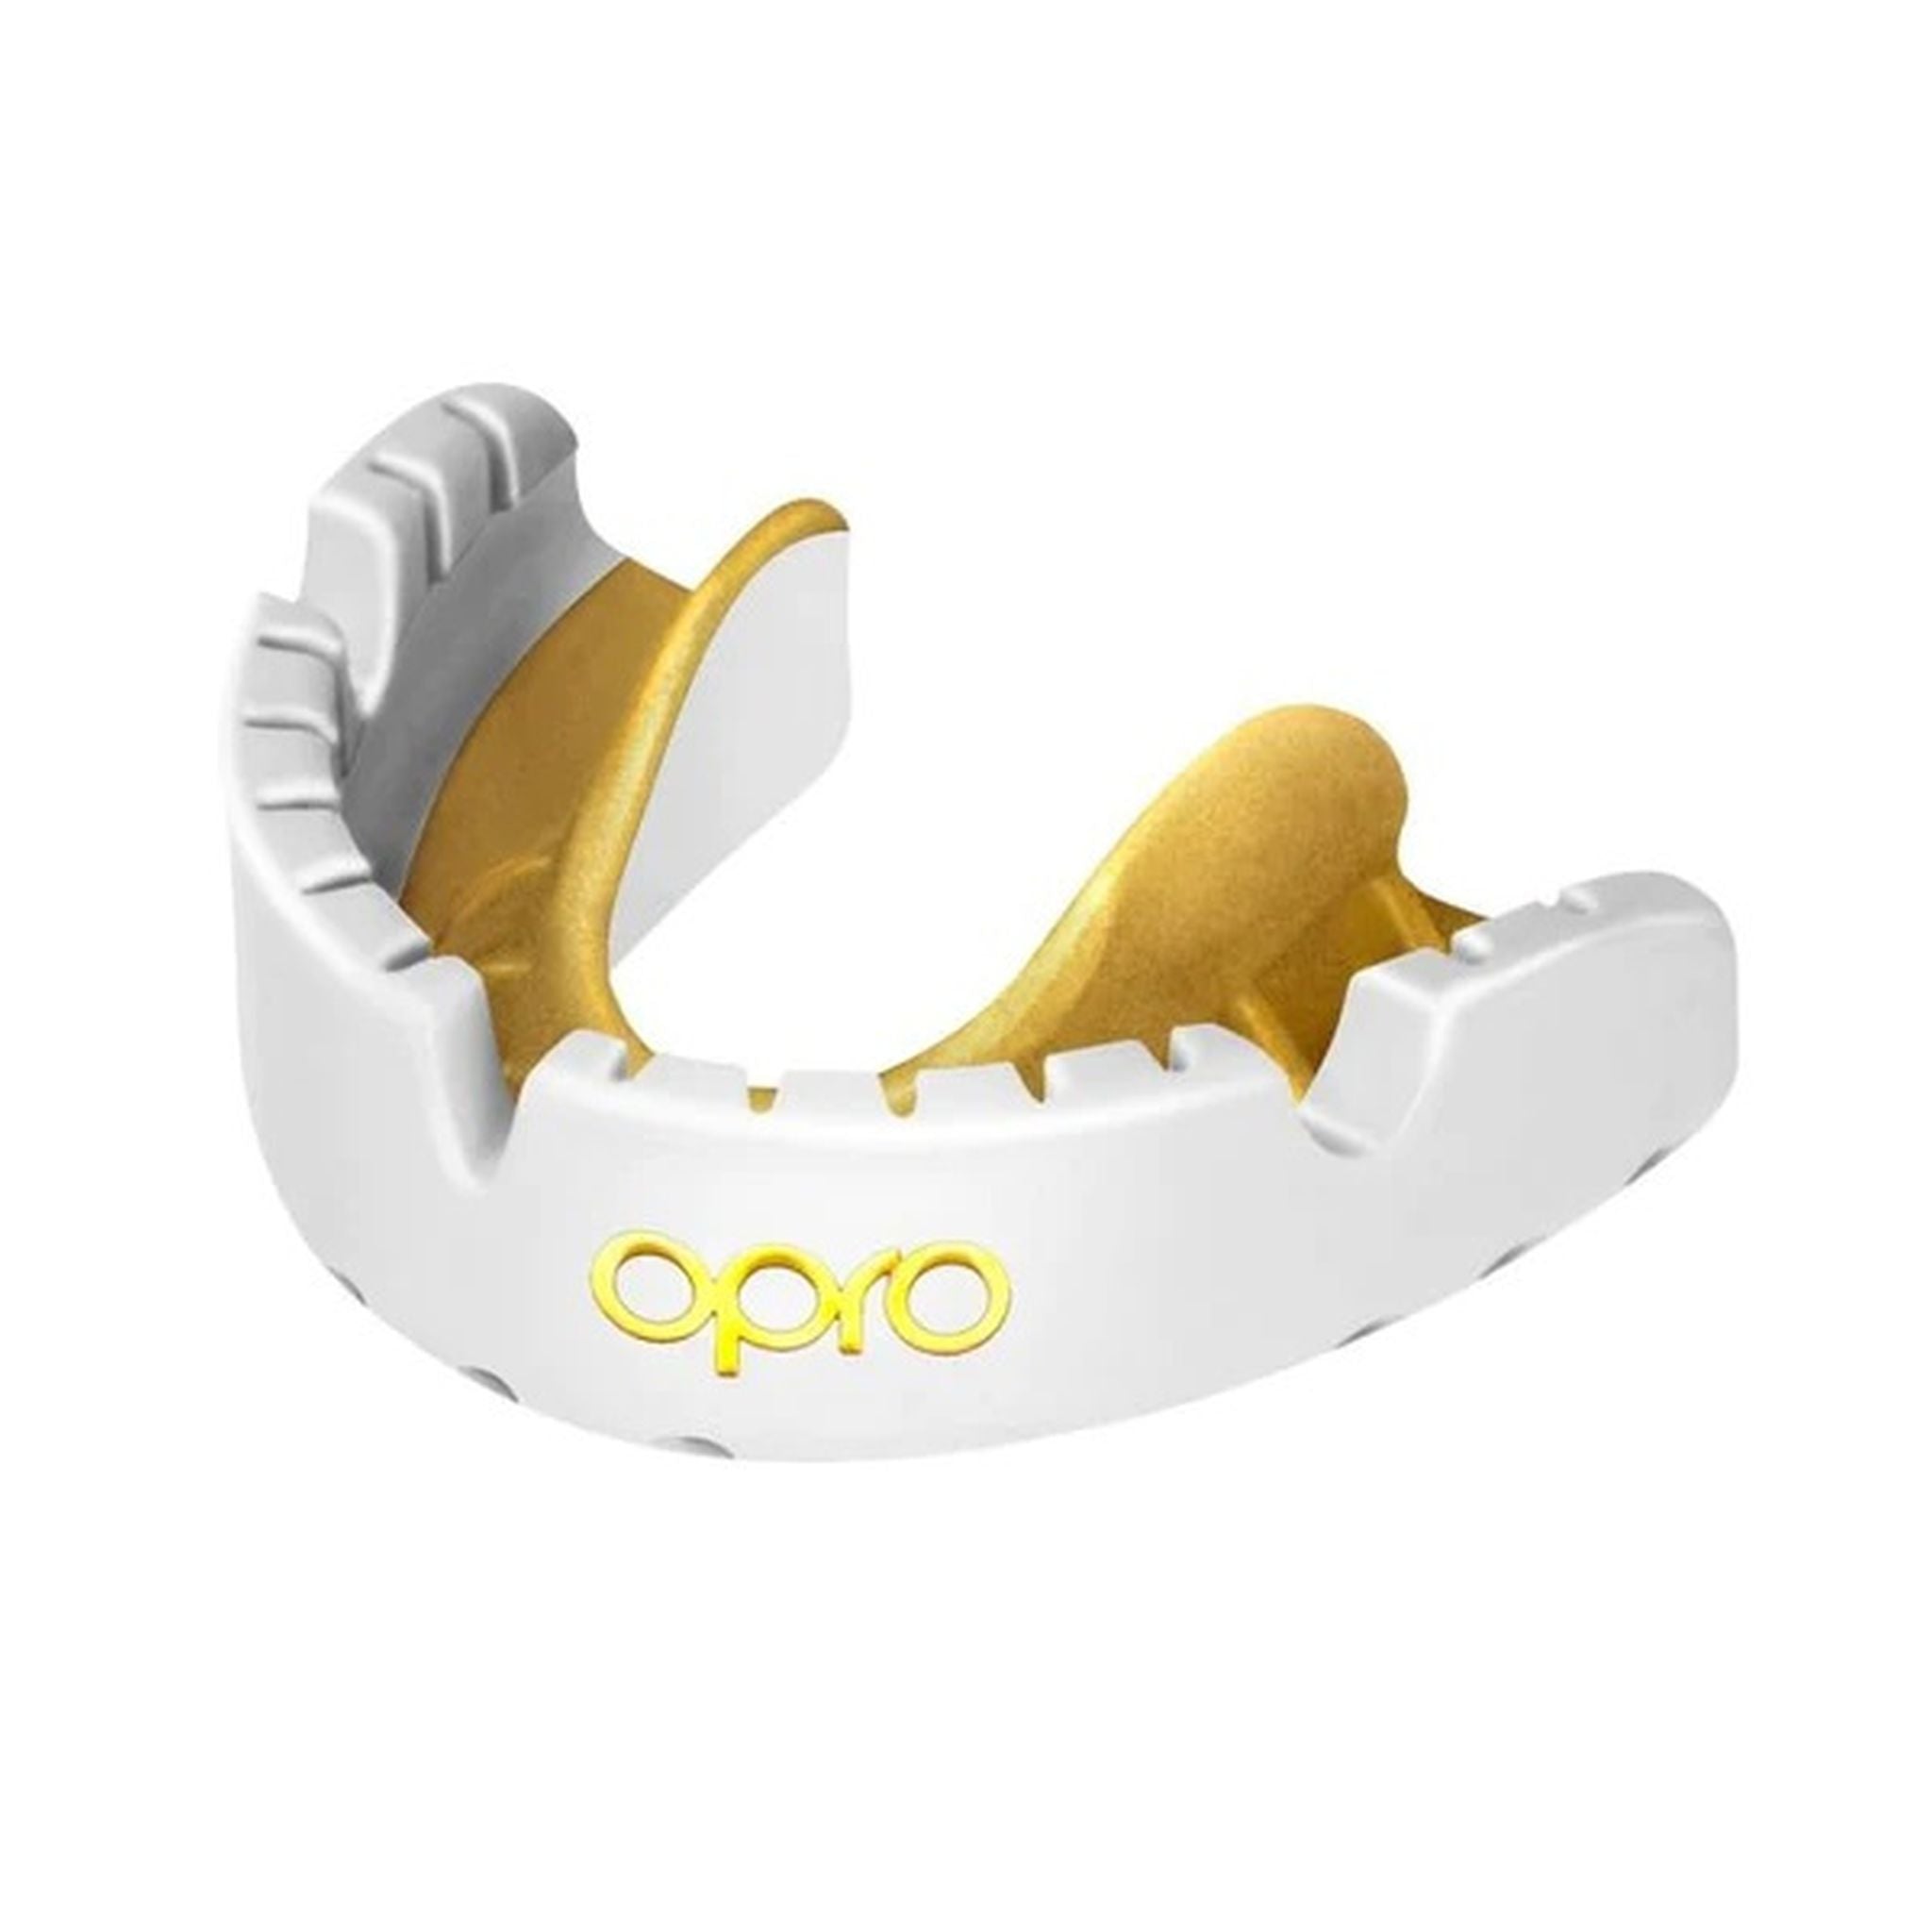 OPRO Self Fit Gold Adult Braces Mouthguard